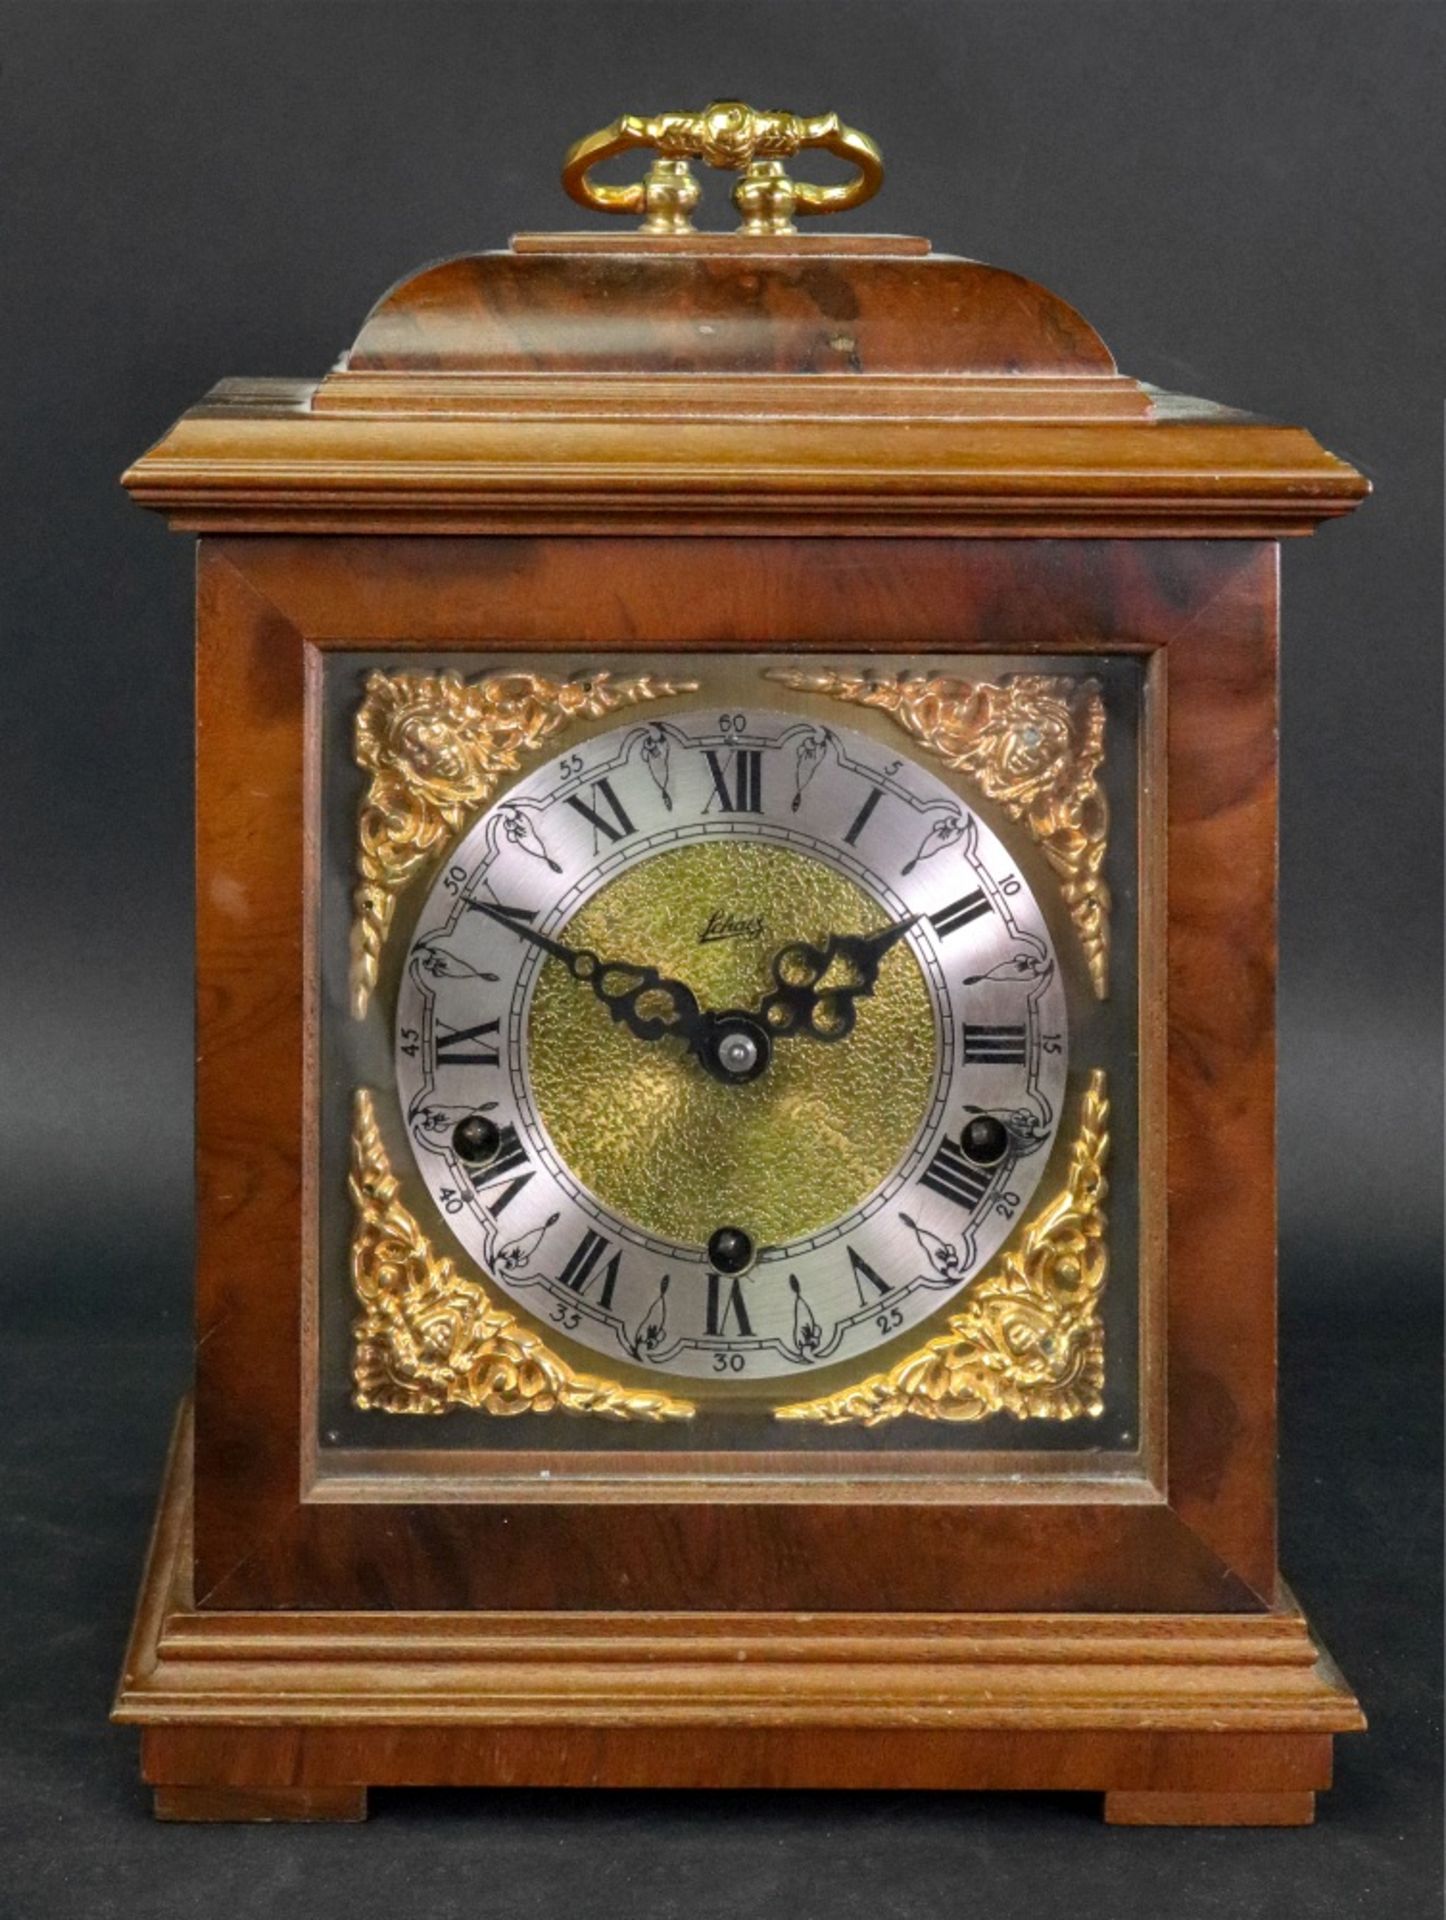 Schatz; a reproduction walnut cased chiming bracket clock, in mid 18th century style,